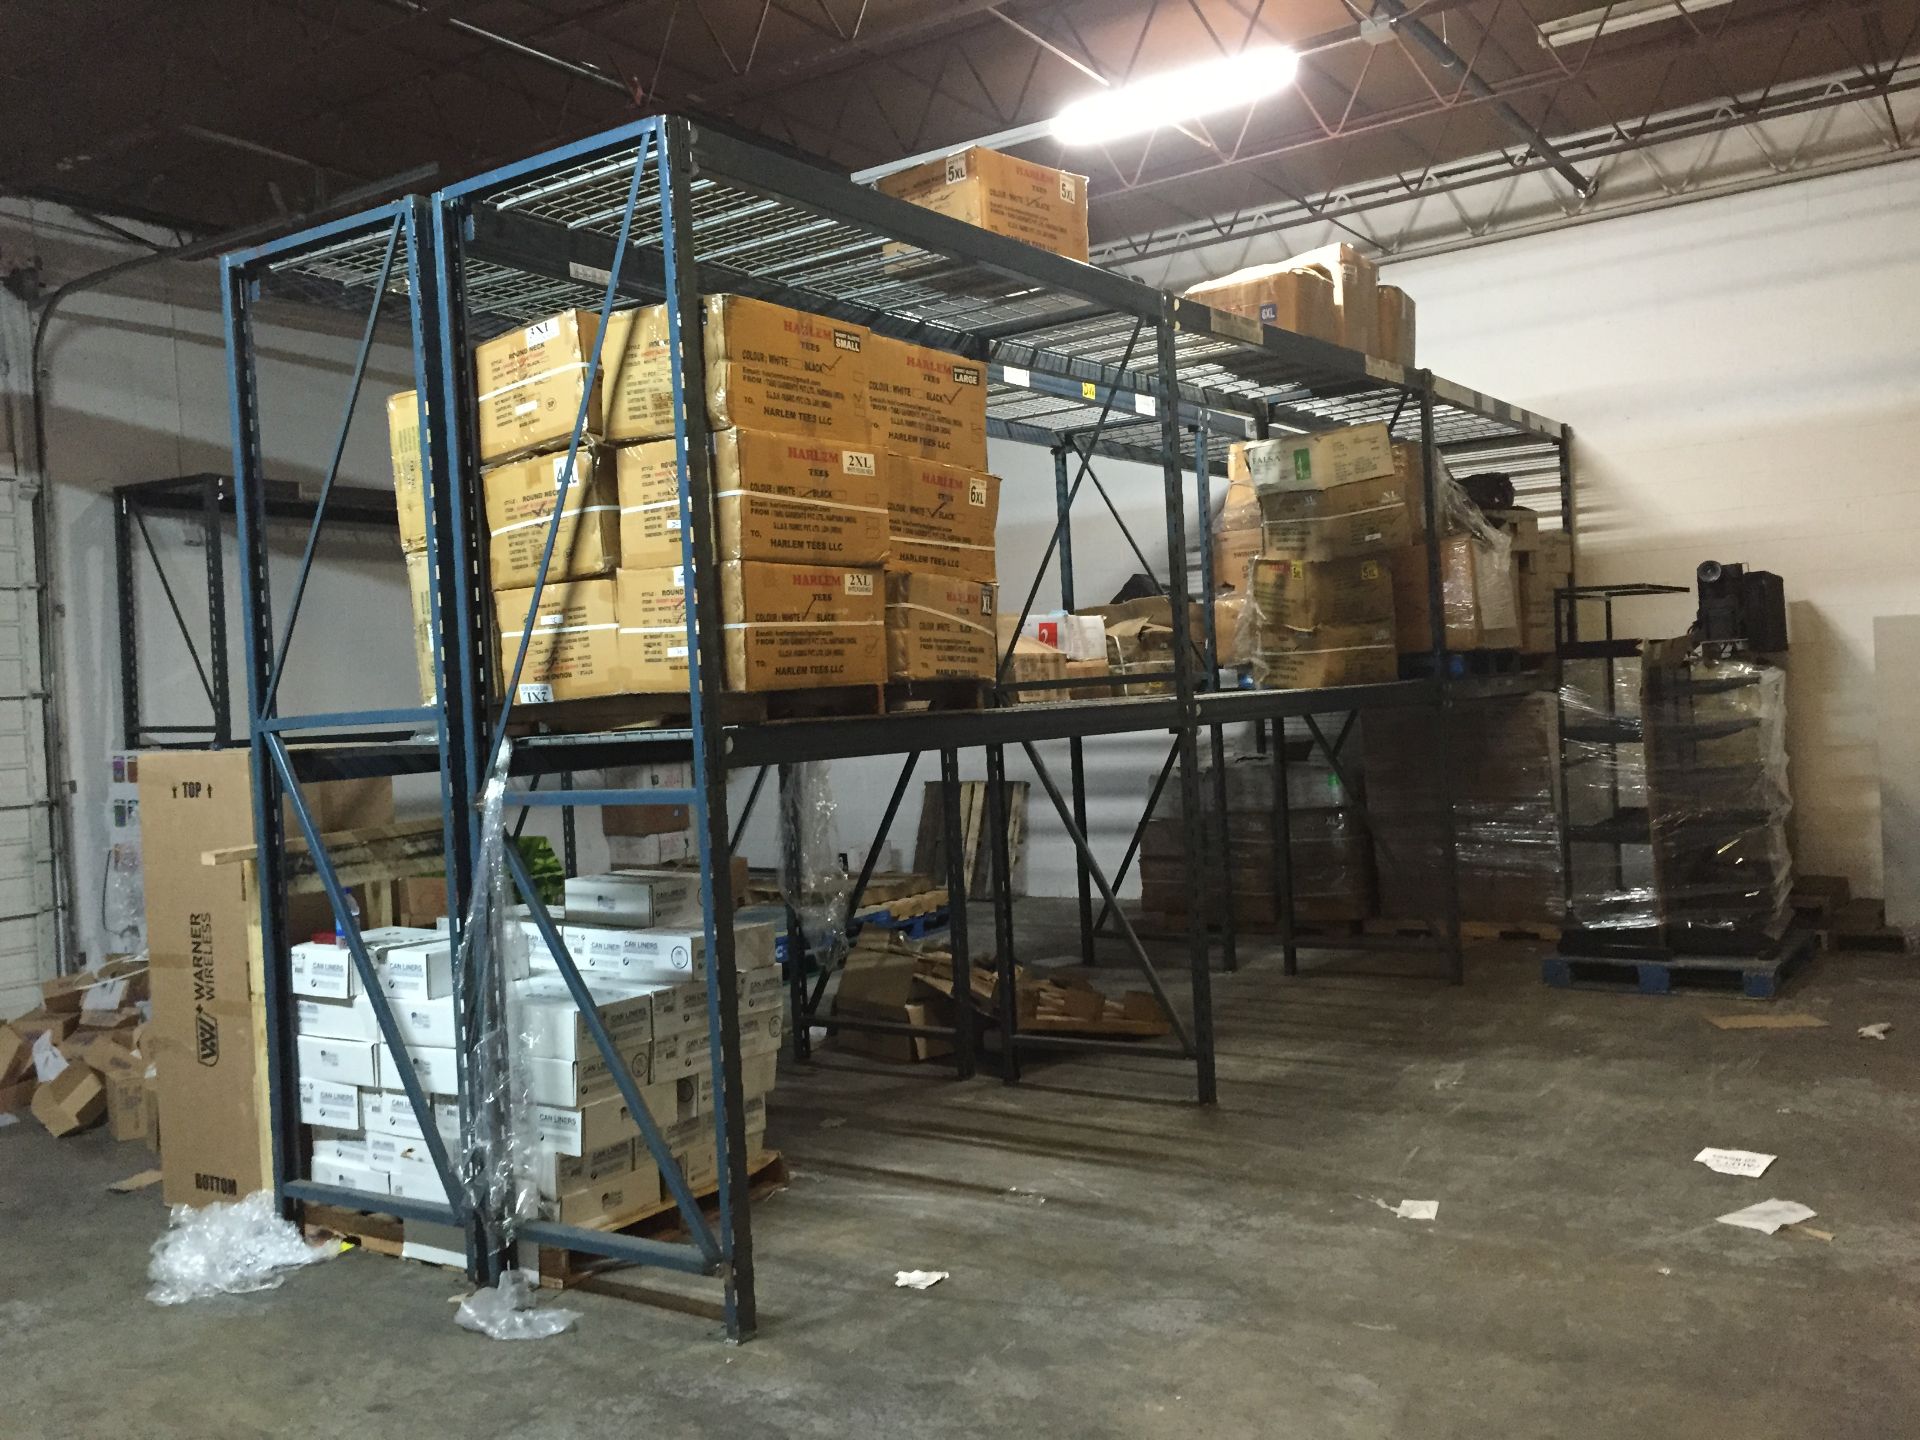 96"H X 36"D X 96"L STOCK ROOM SHELVING, TOTAL 10 SECTIONS WITH 2 BEAM LEVELS EACH,  INCLUDES - Image 2 of 9